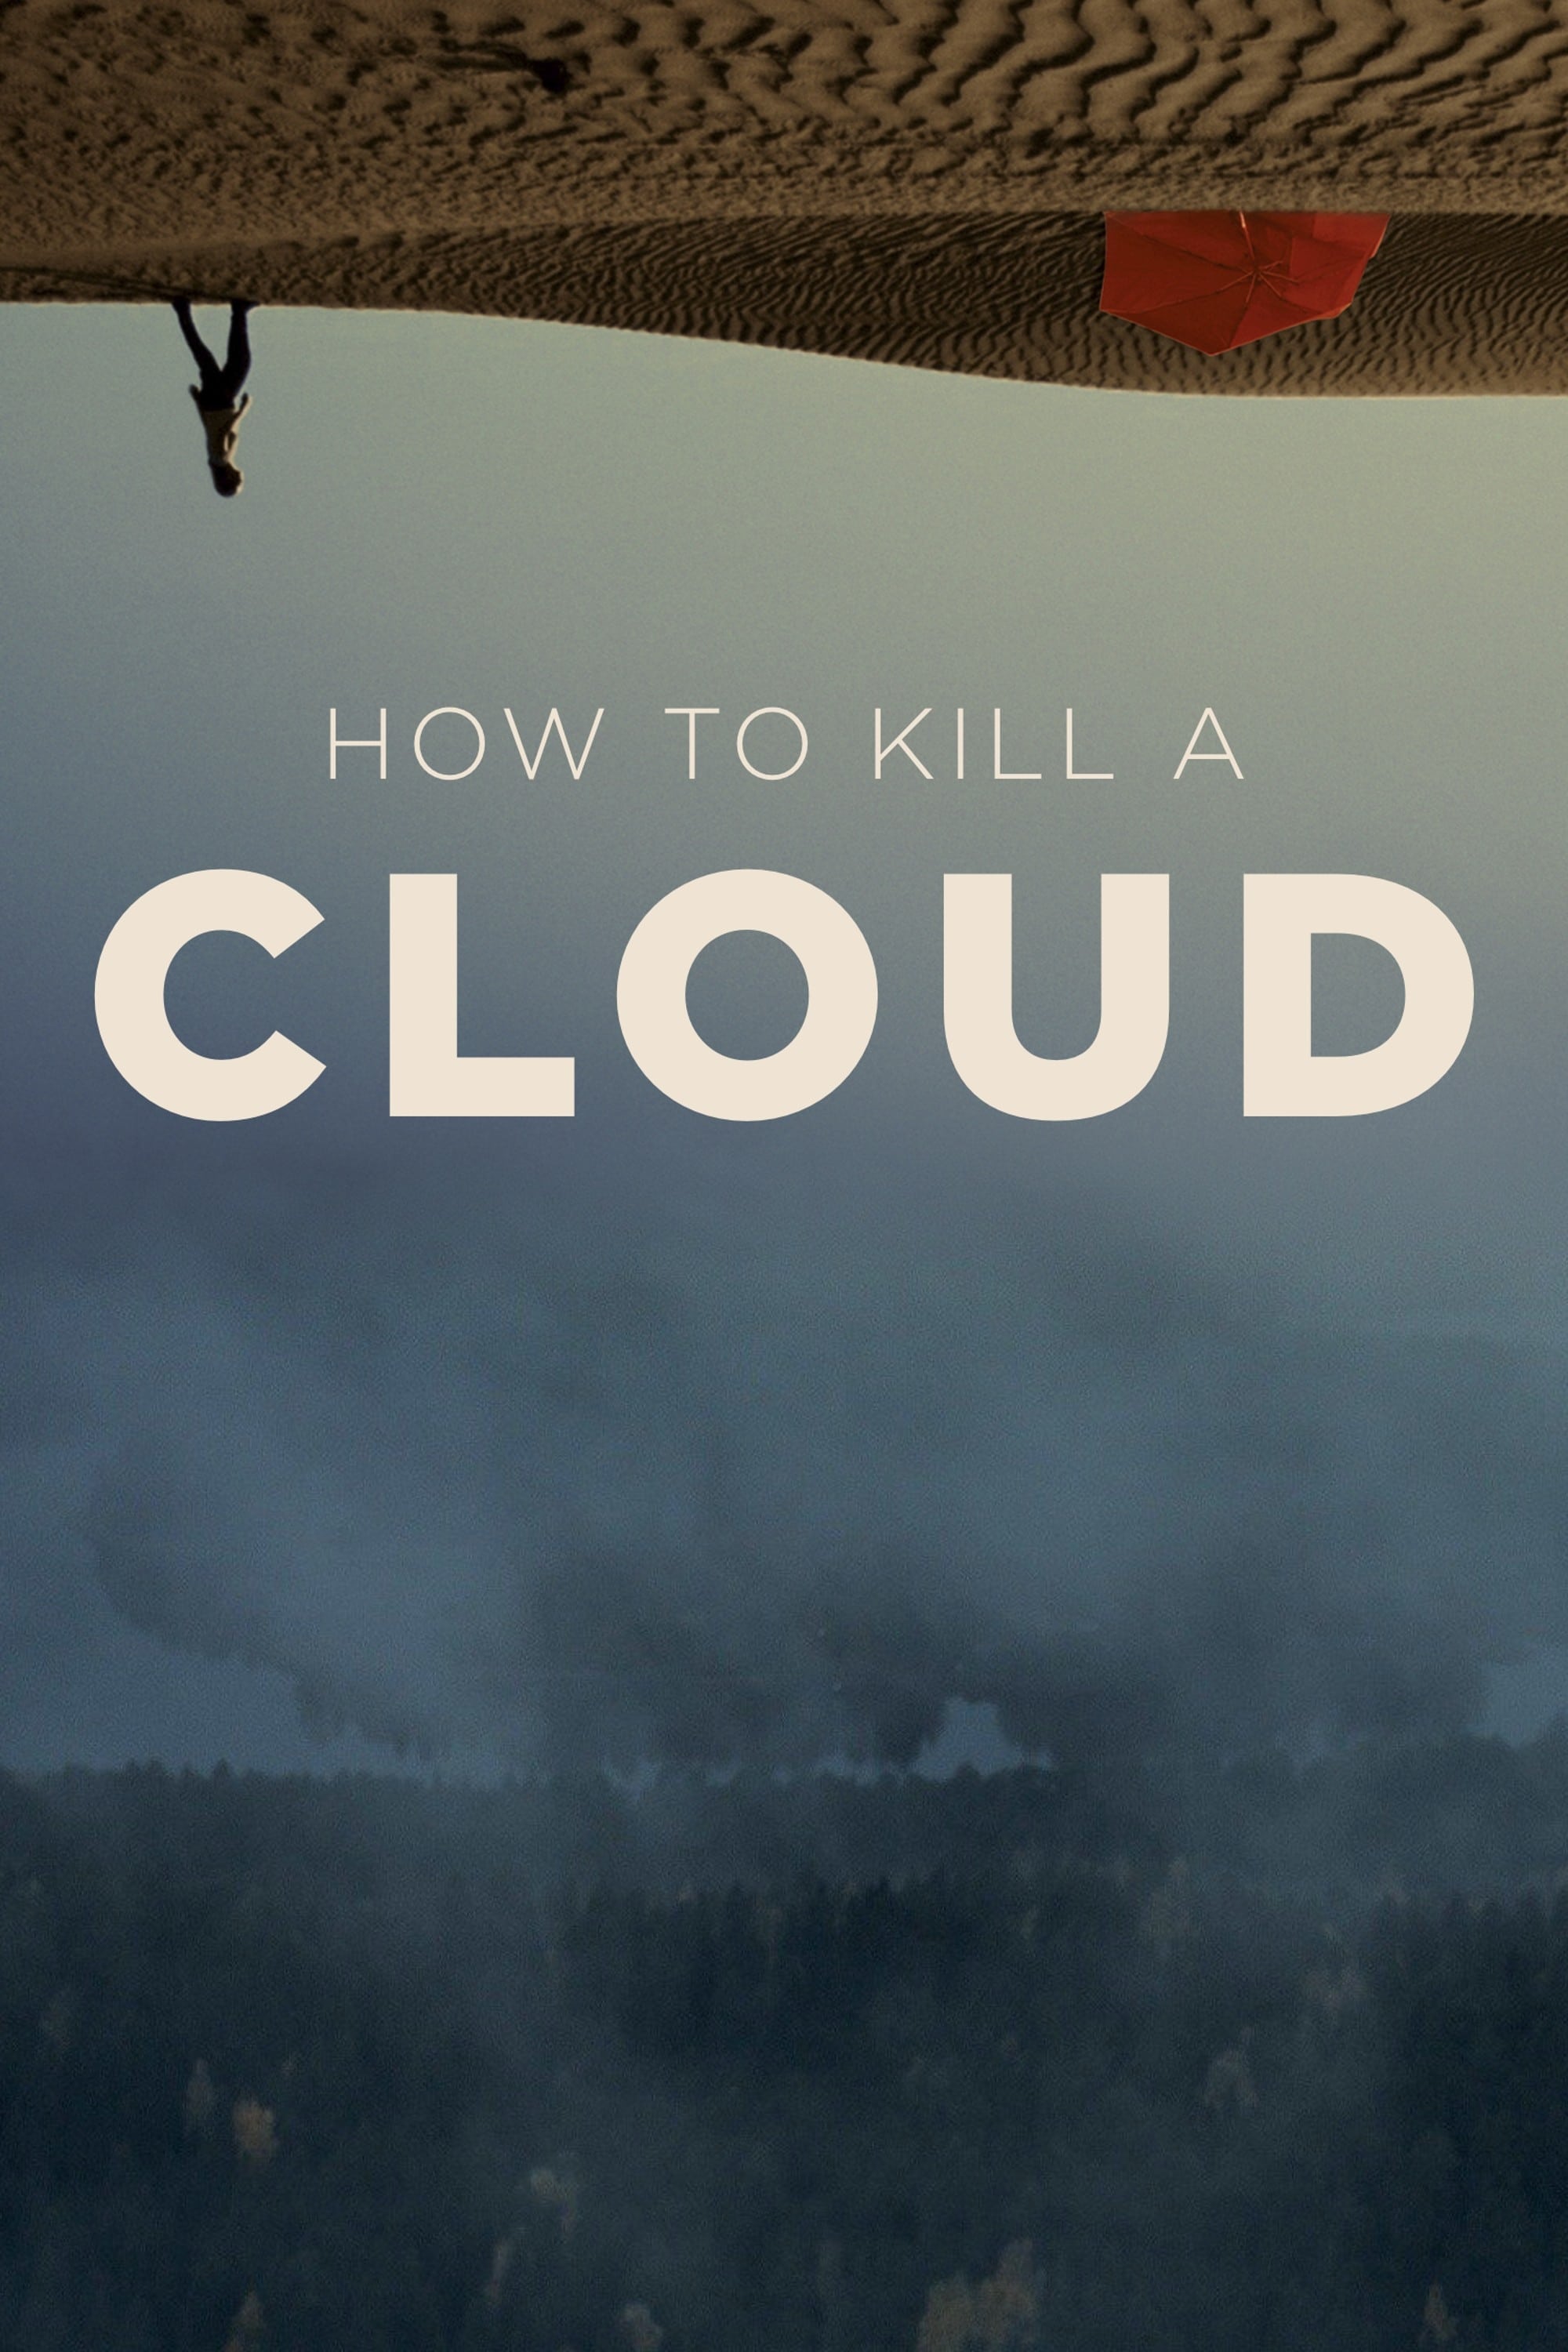 How to Kill a Cloud